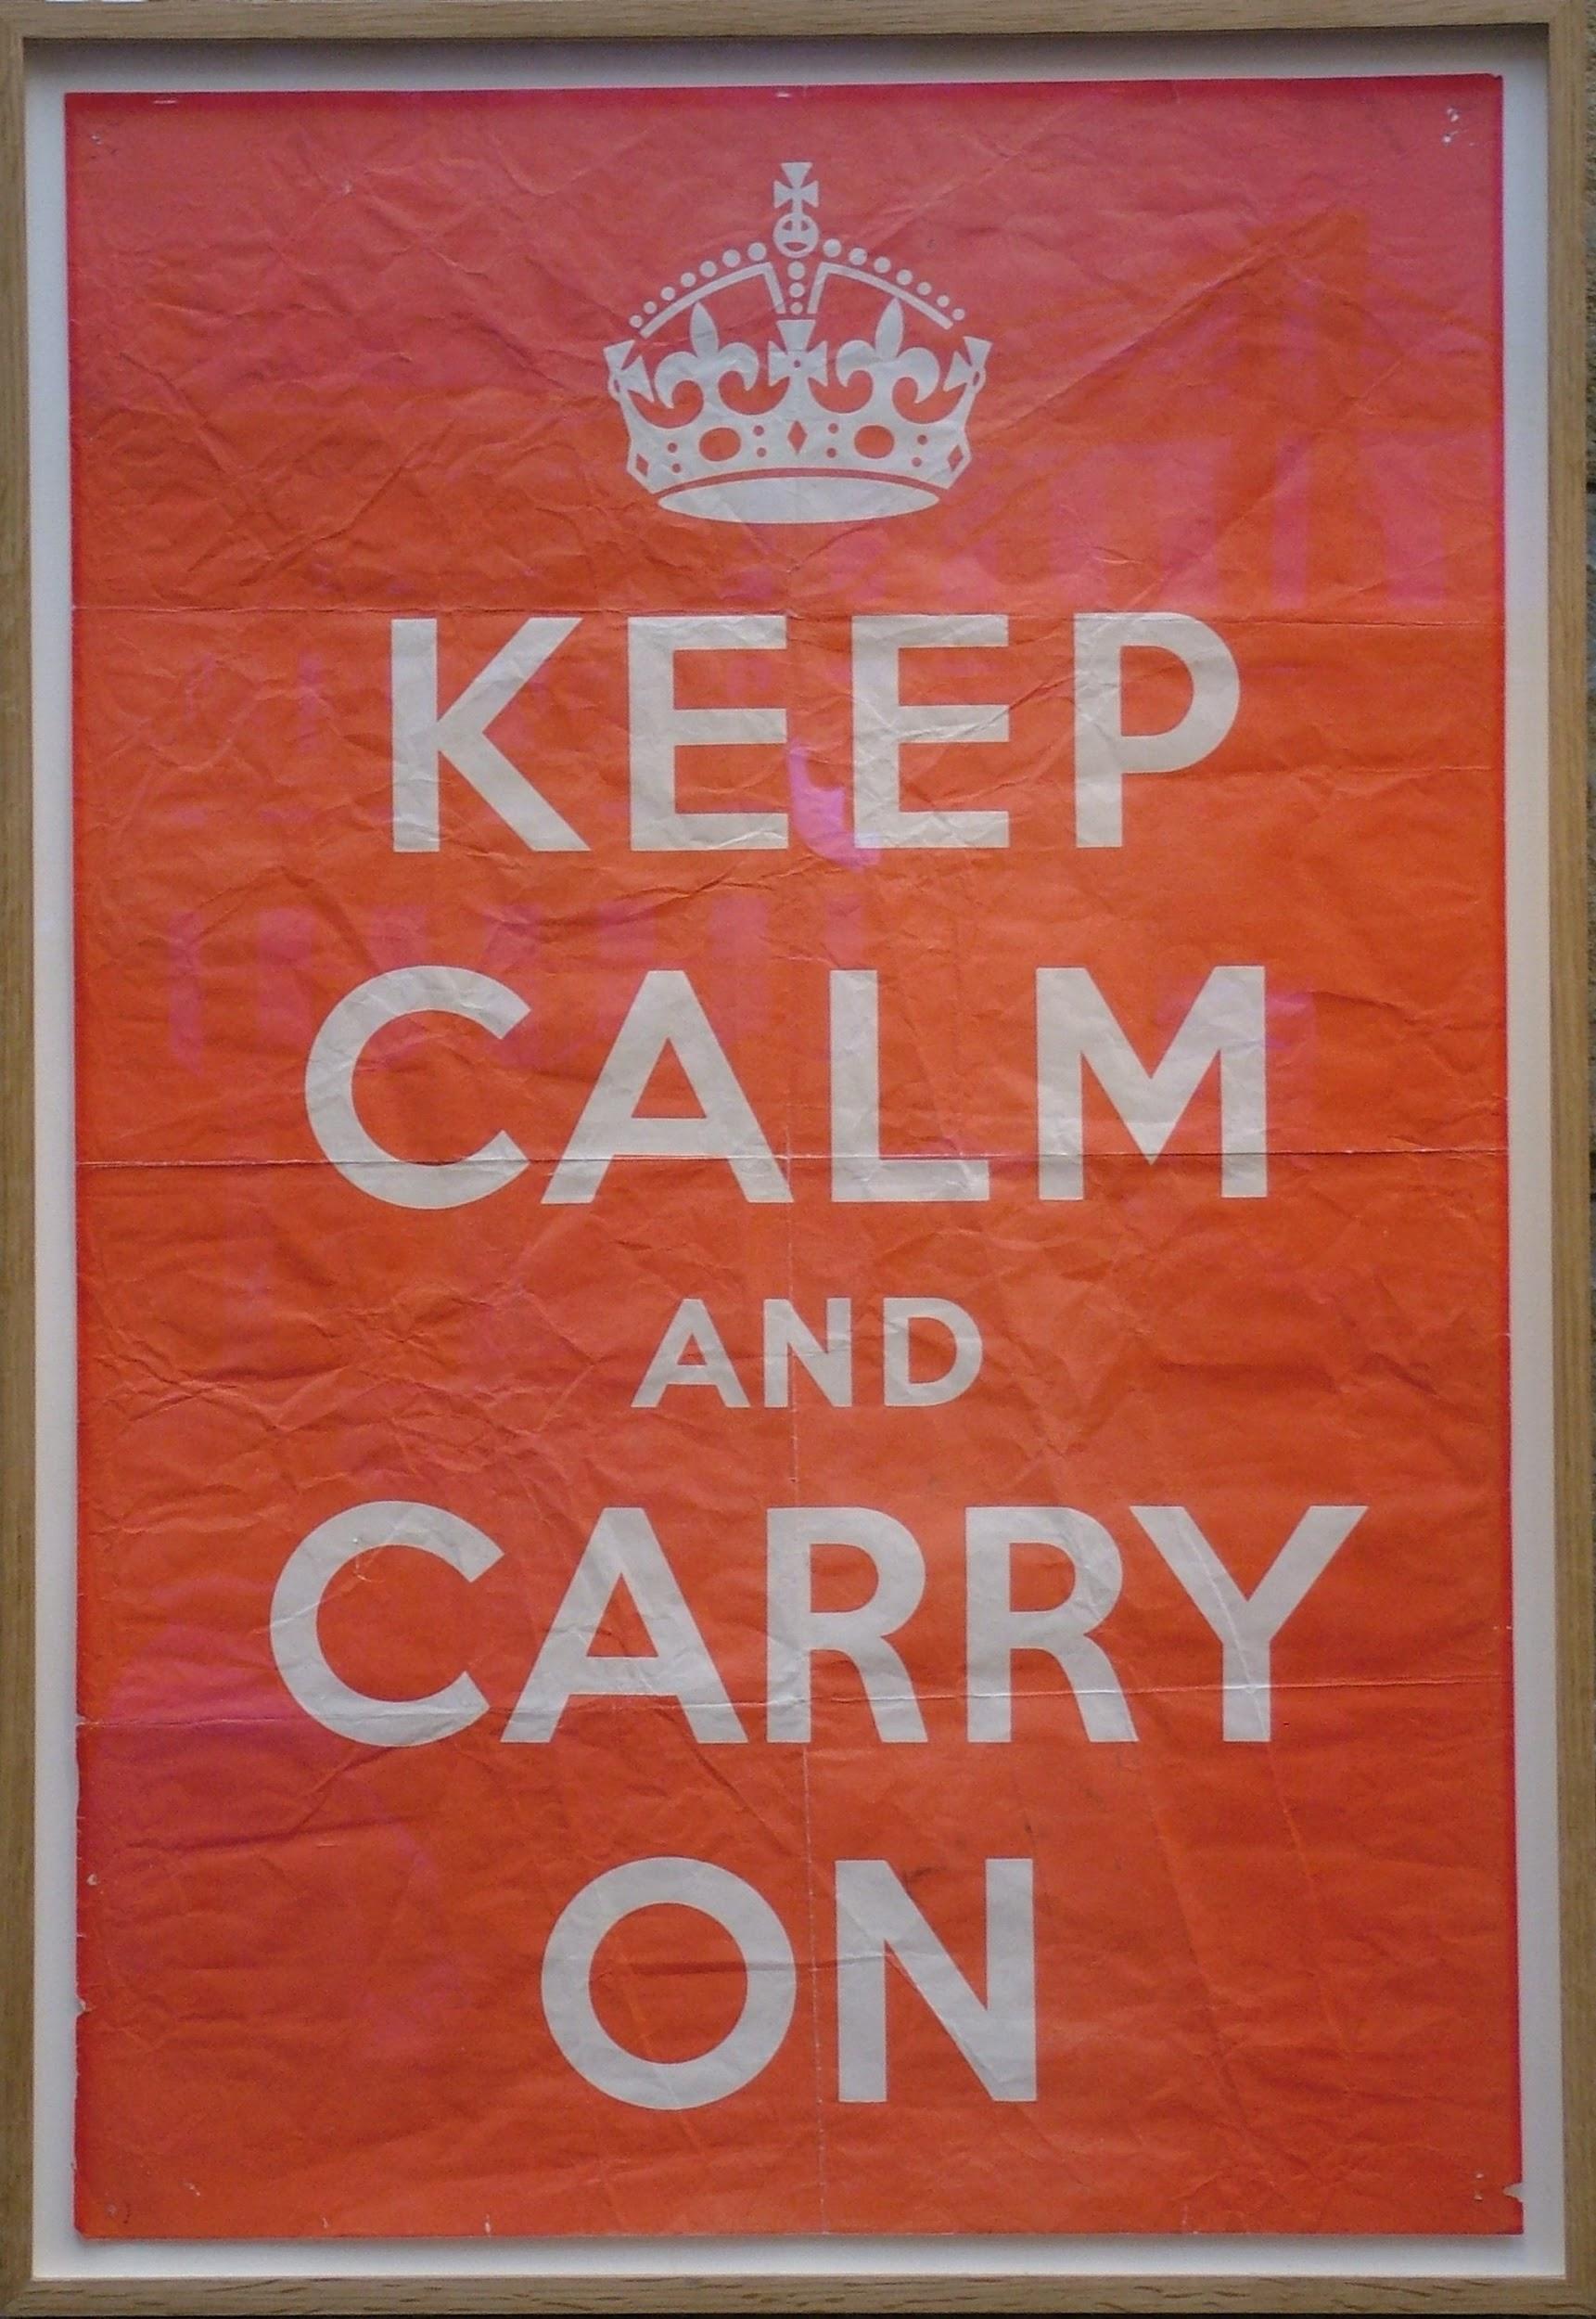 Photo of an original poster “Keep Calm and Carry On”, produced in 1939